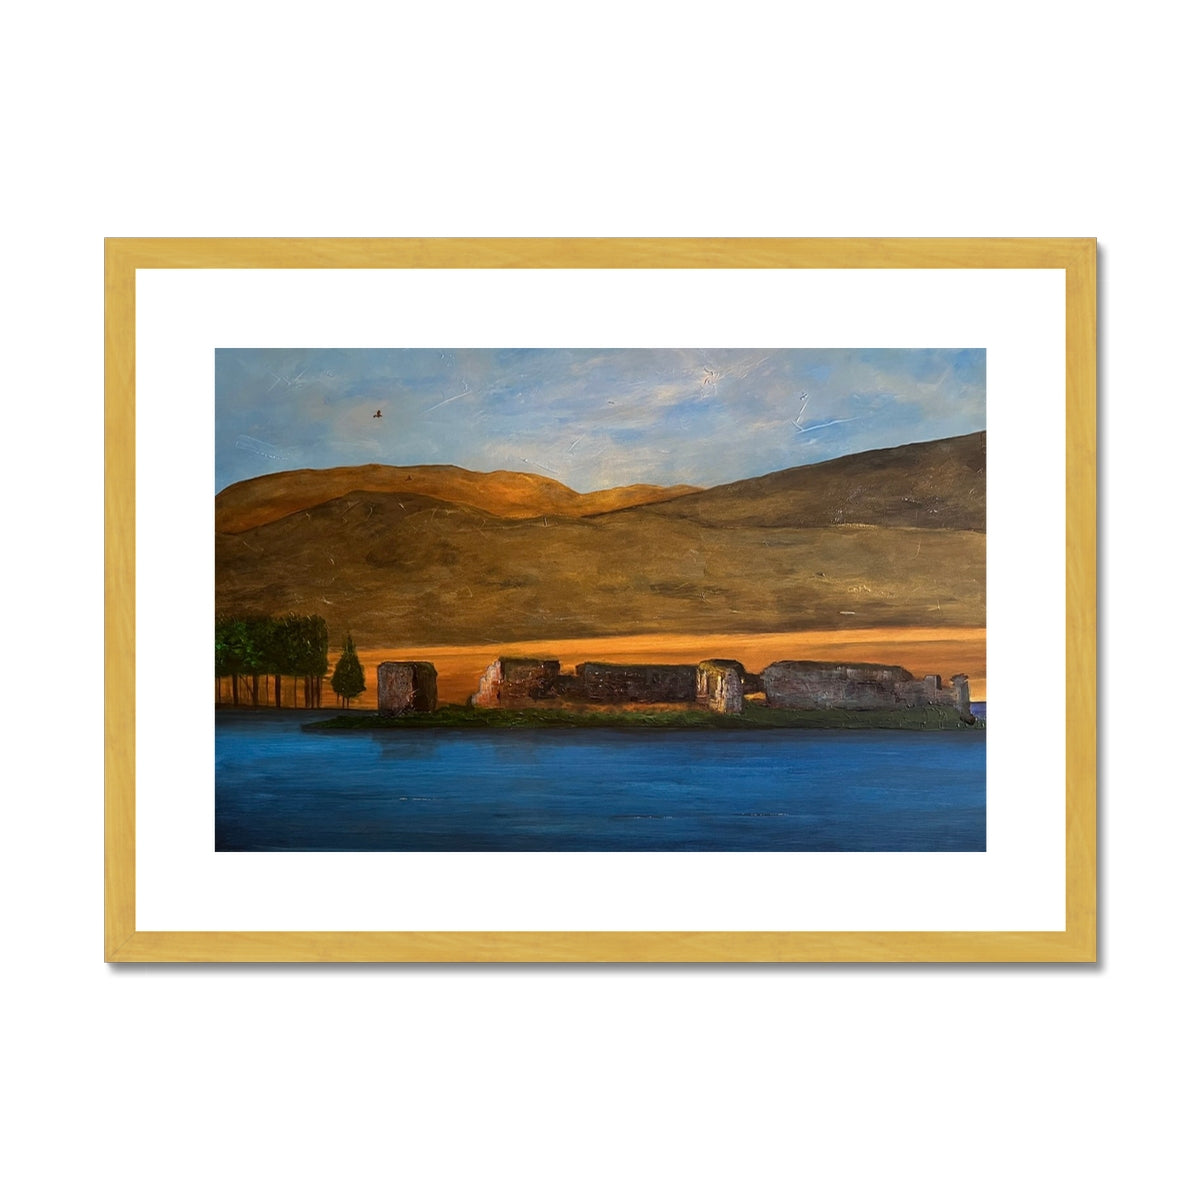 Lochindorb Castle Painting | Antique Framed & Mounted Prints From Scotland-Antique Framed & Mounted Prints-Scottish Lochs & Mountains Art Gallery-A2 Landscape-Gold Frame-Paintings, Prints, Homeware, Art Gifts From Scotland By Scottish Artist Kevin Hunter